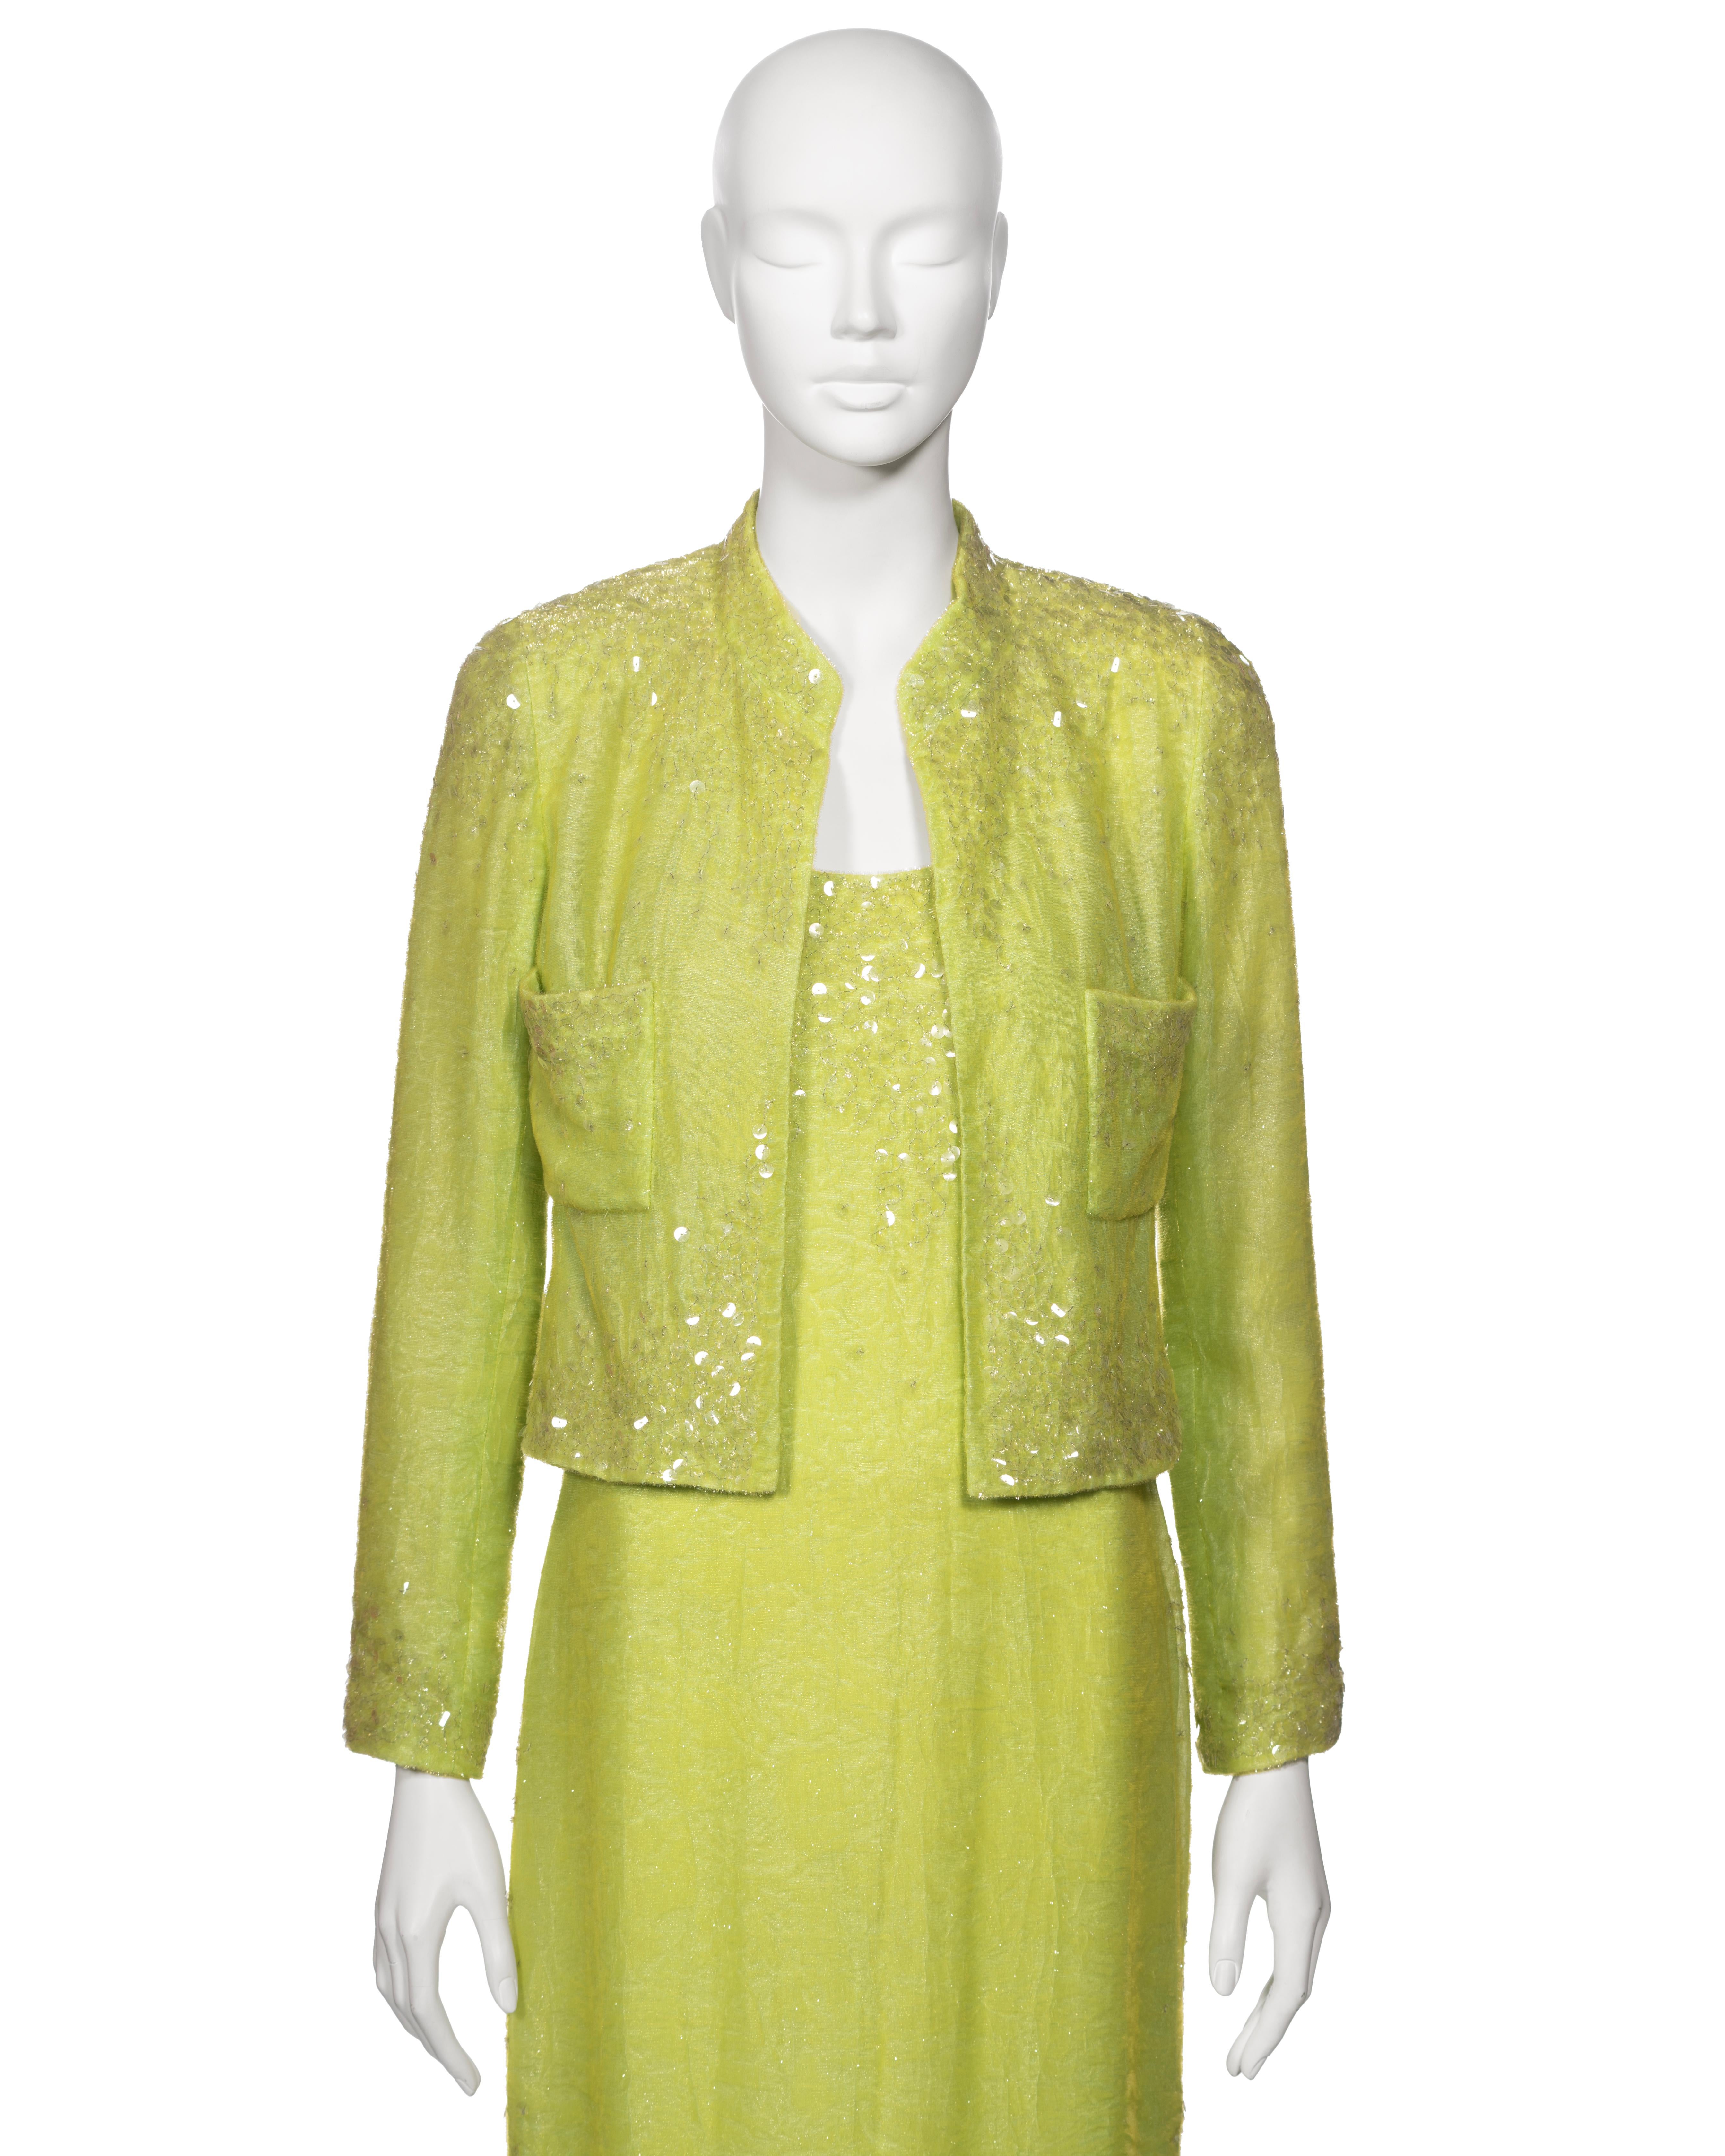 Chanel by Karl Lagerfeld Embellished Lime Green Velvet Dress and Jacket, ss 1997 For Sale 4